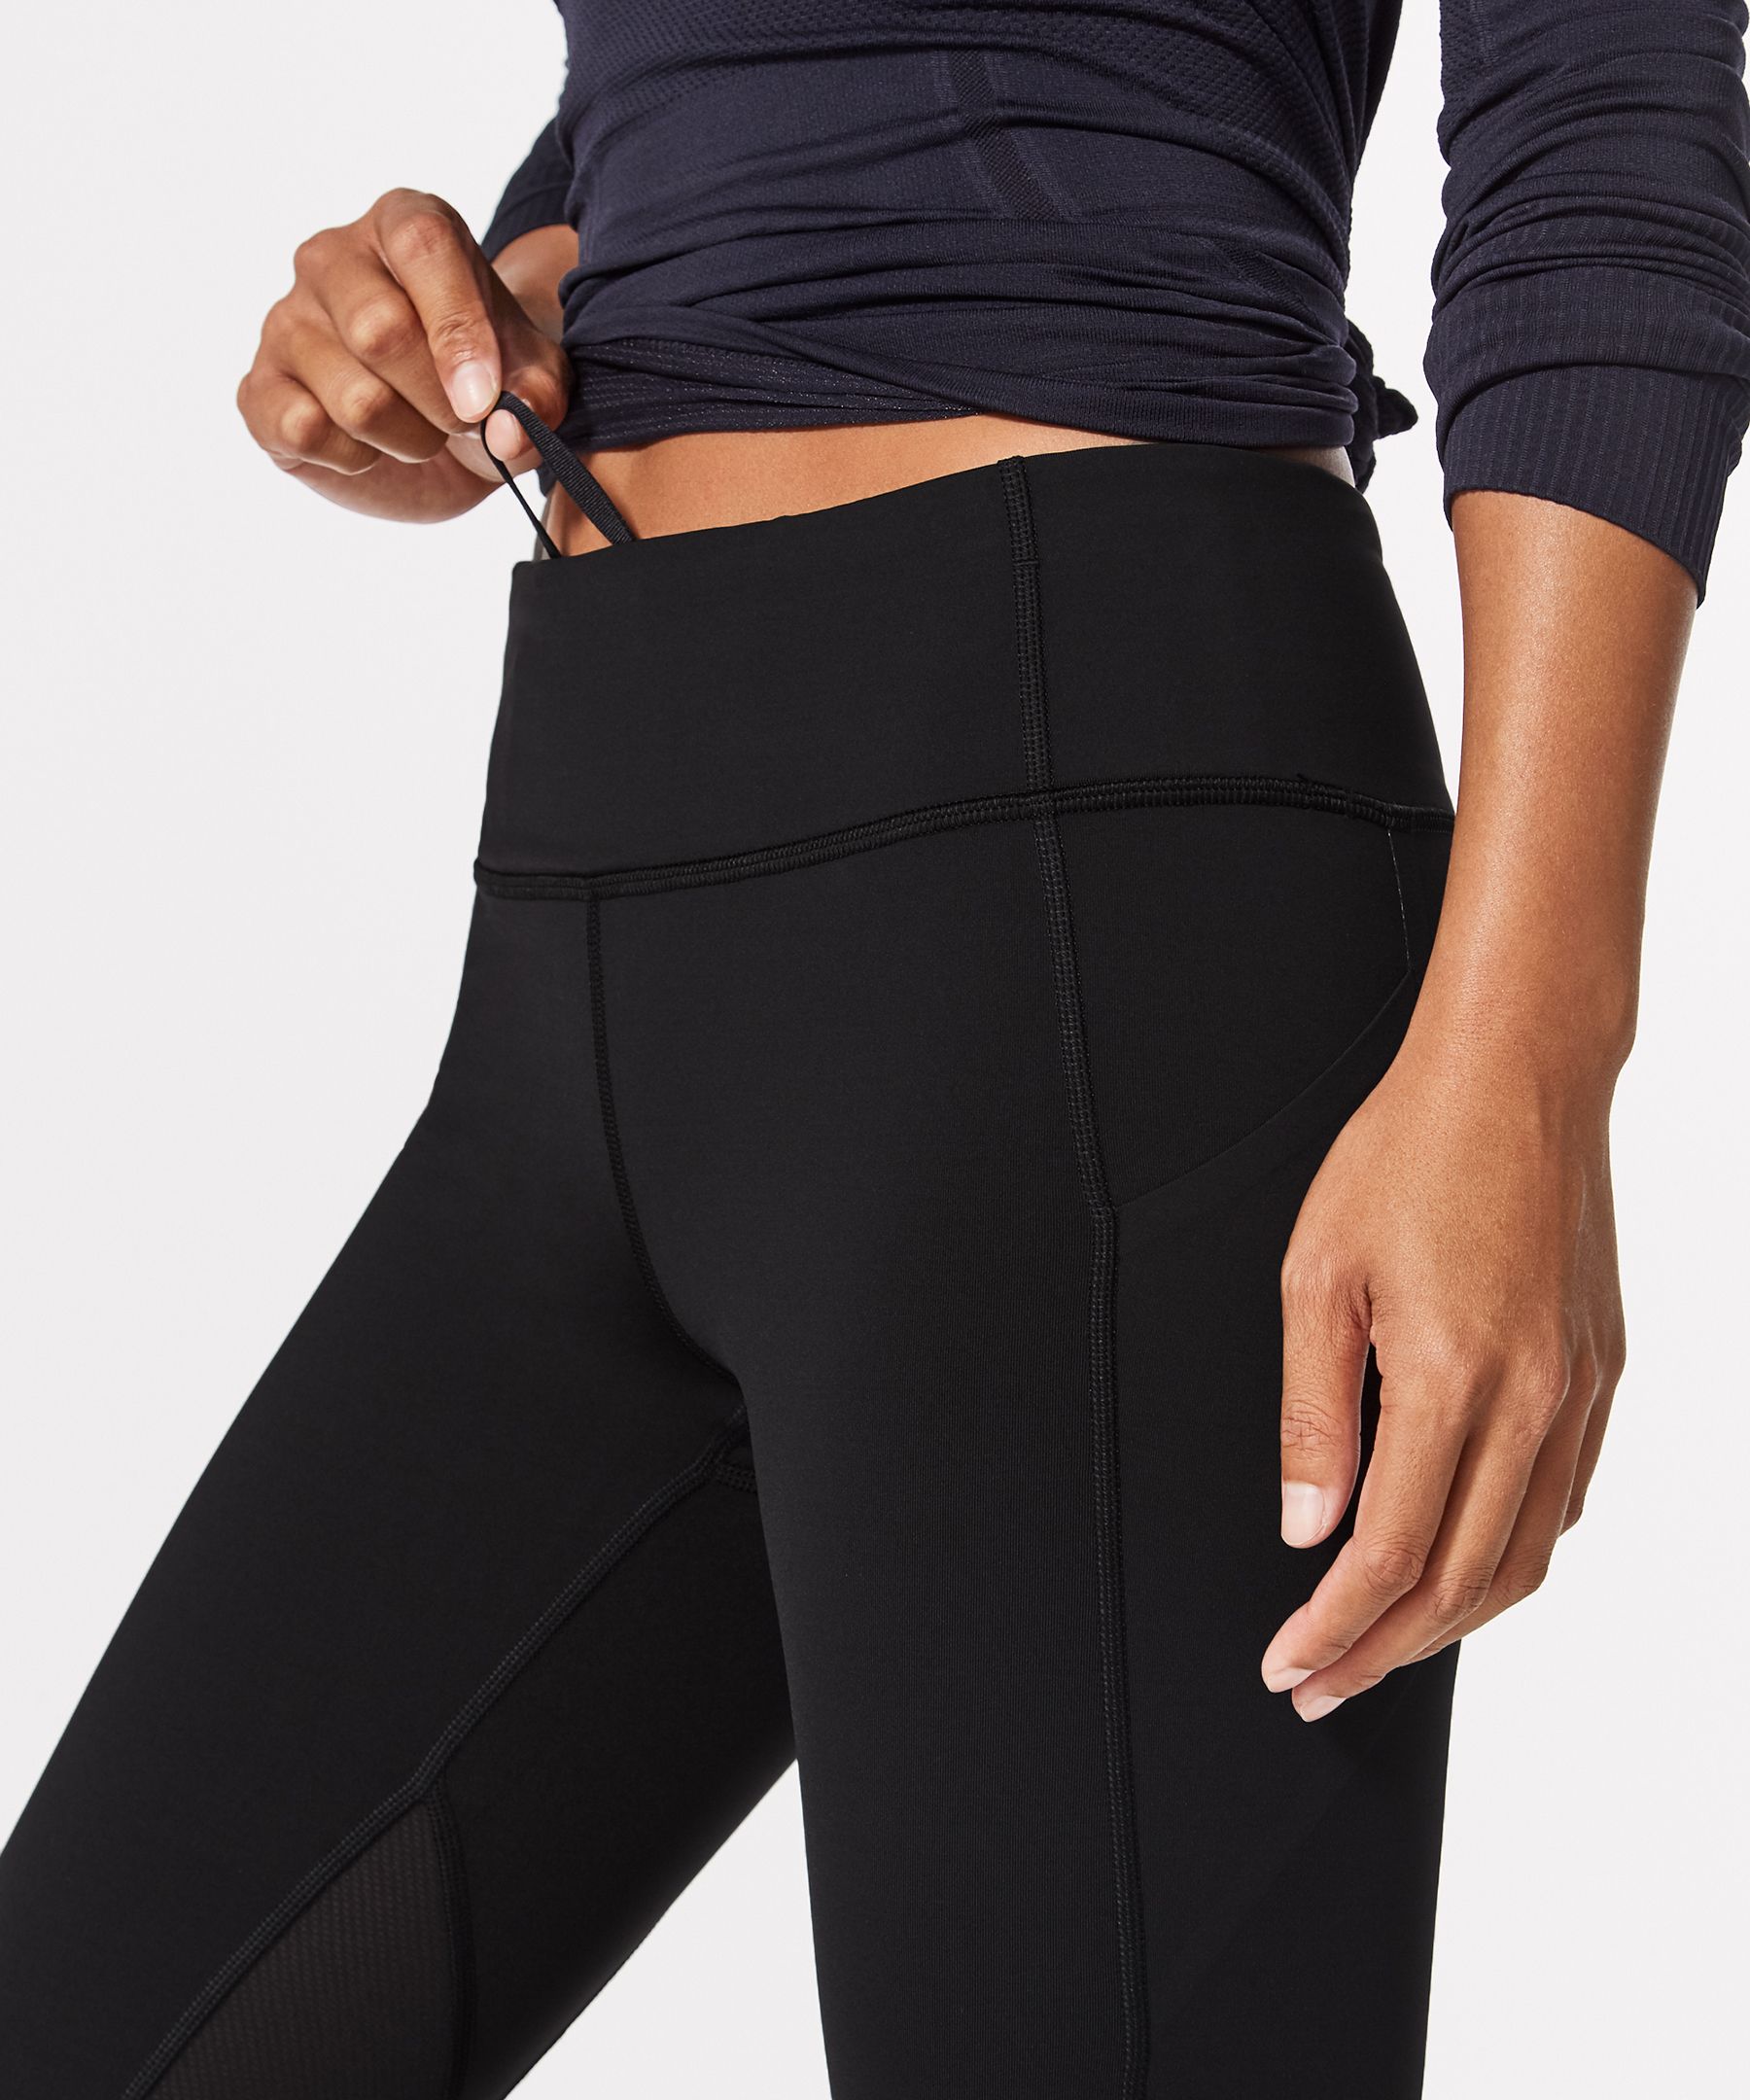 Pace Rival Crop Lululemon  International Society of Precision